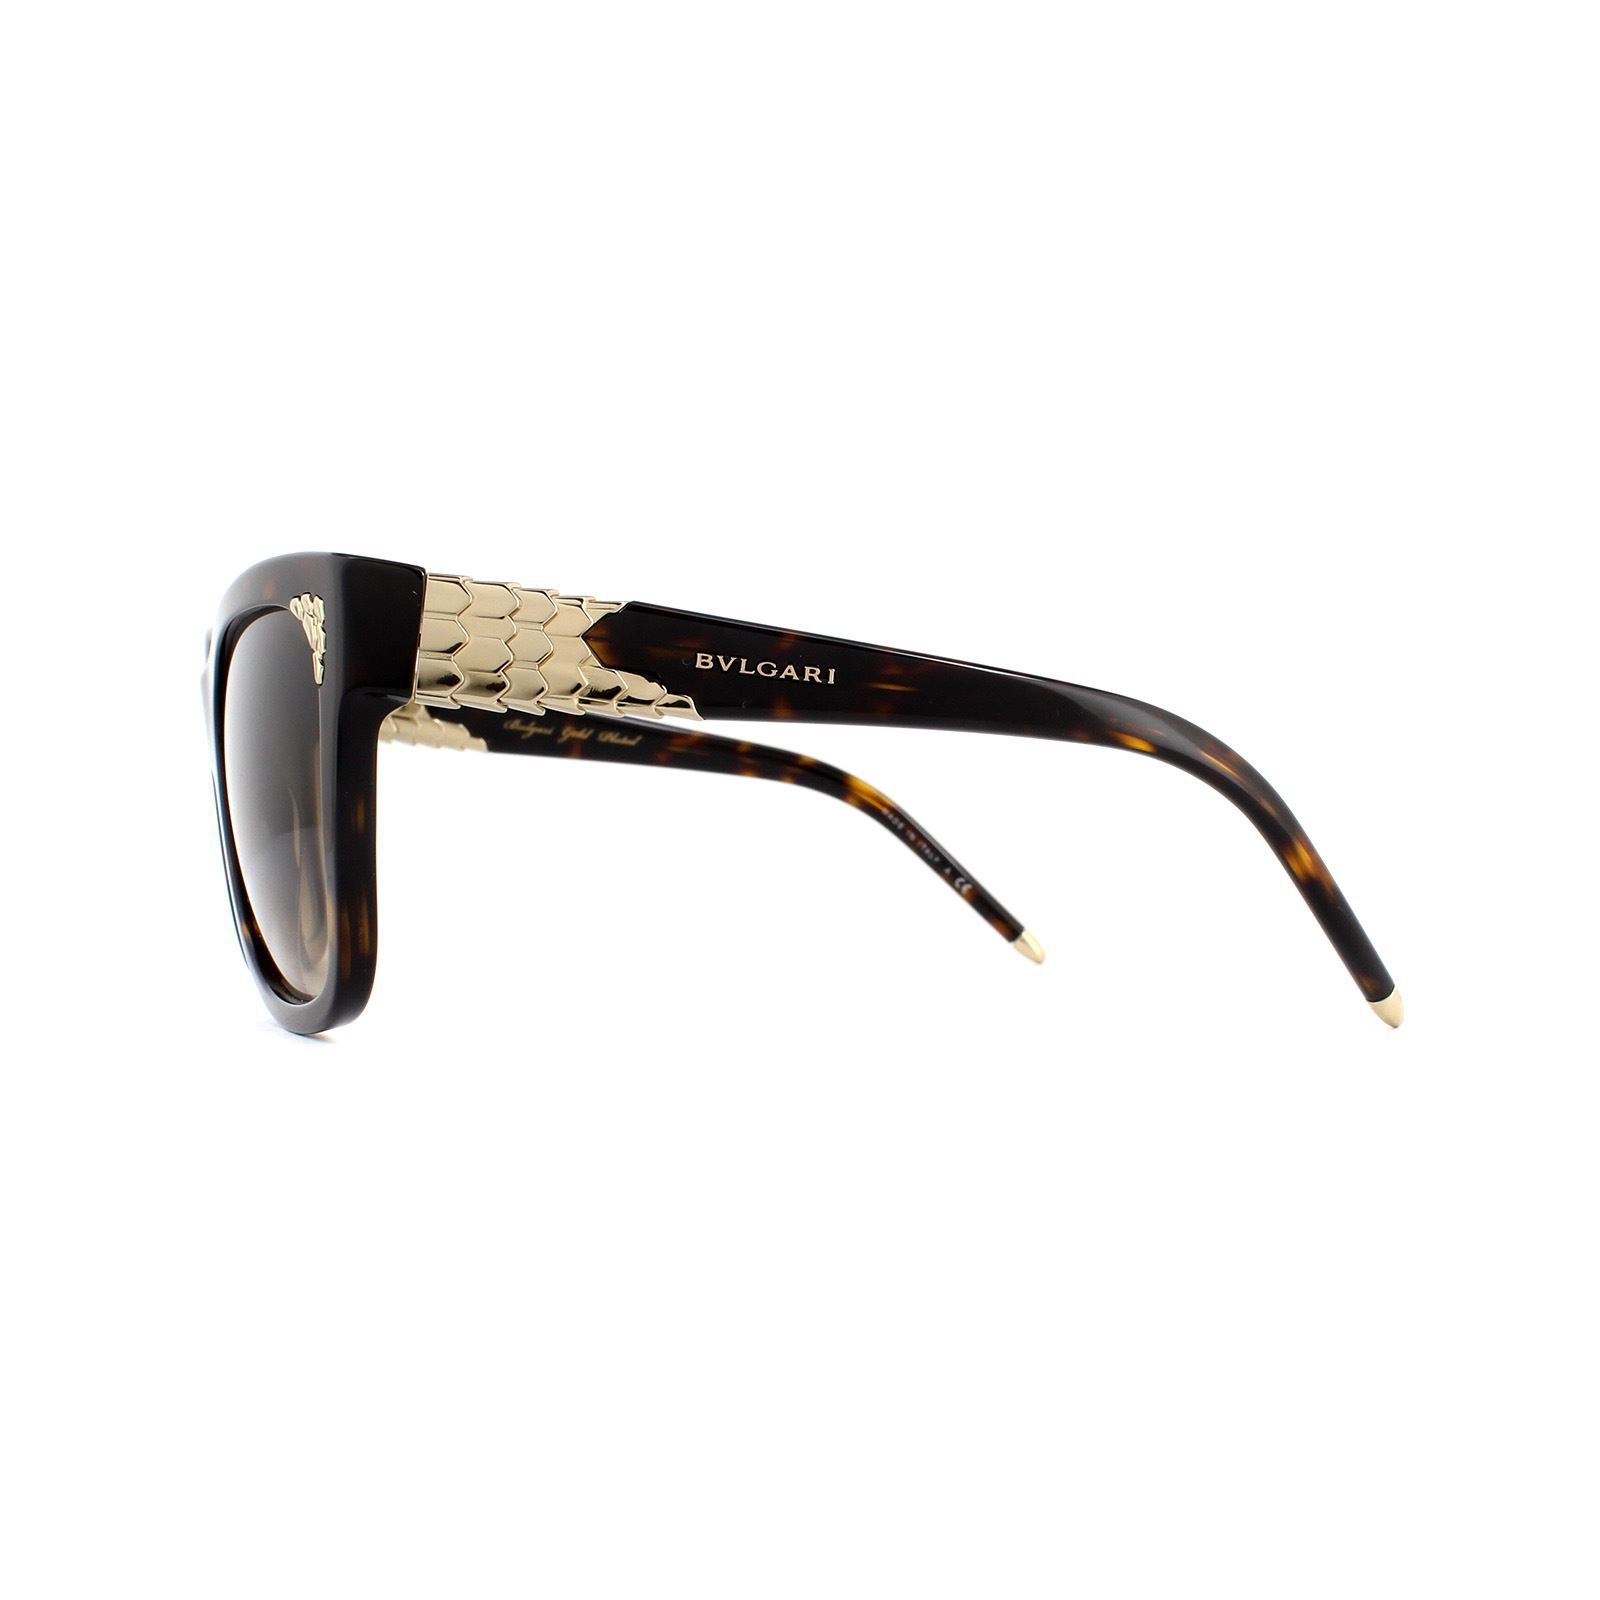 Bvlgari Sunglasses BV8134K 504/13 Dark Havana Brown Gradient are elegant square style sunglasses for women featuring Bvlgari's honeycomb pattern on the temples and lens corners. The Bvlgari logo is showcased on the temples for brand recognition.